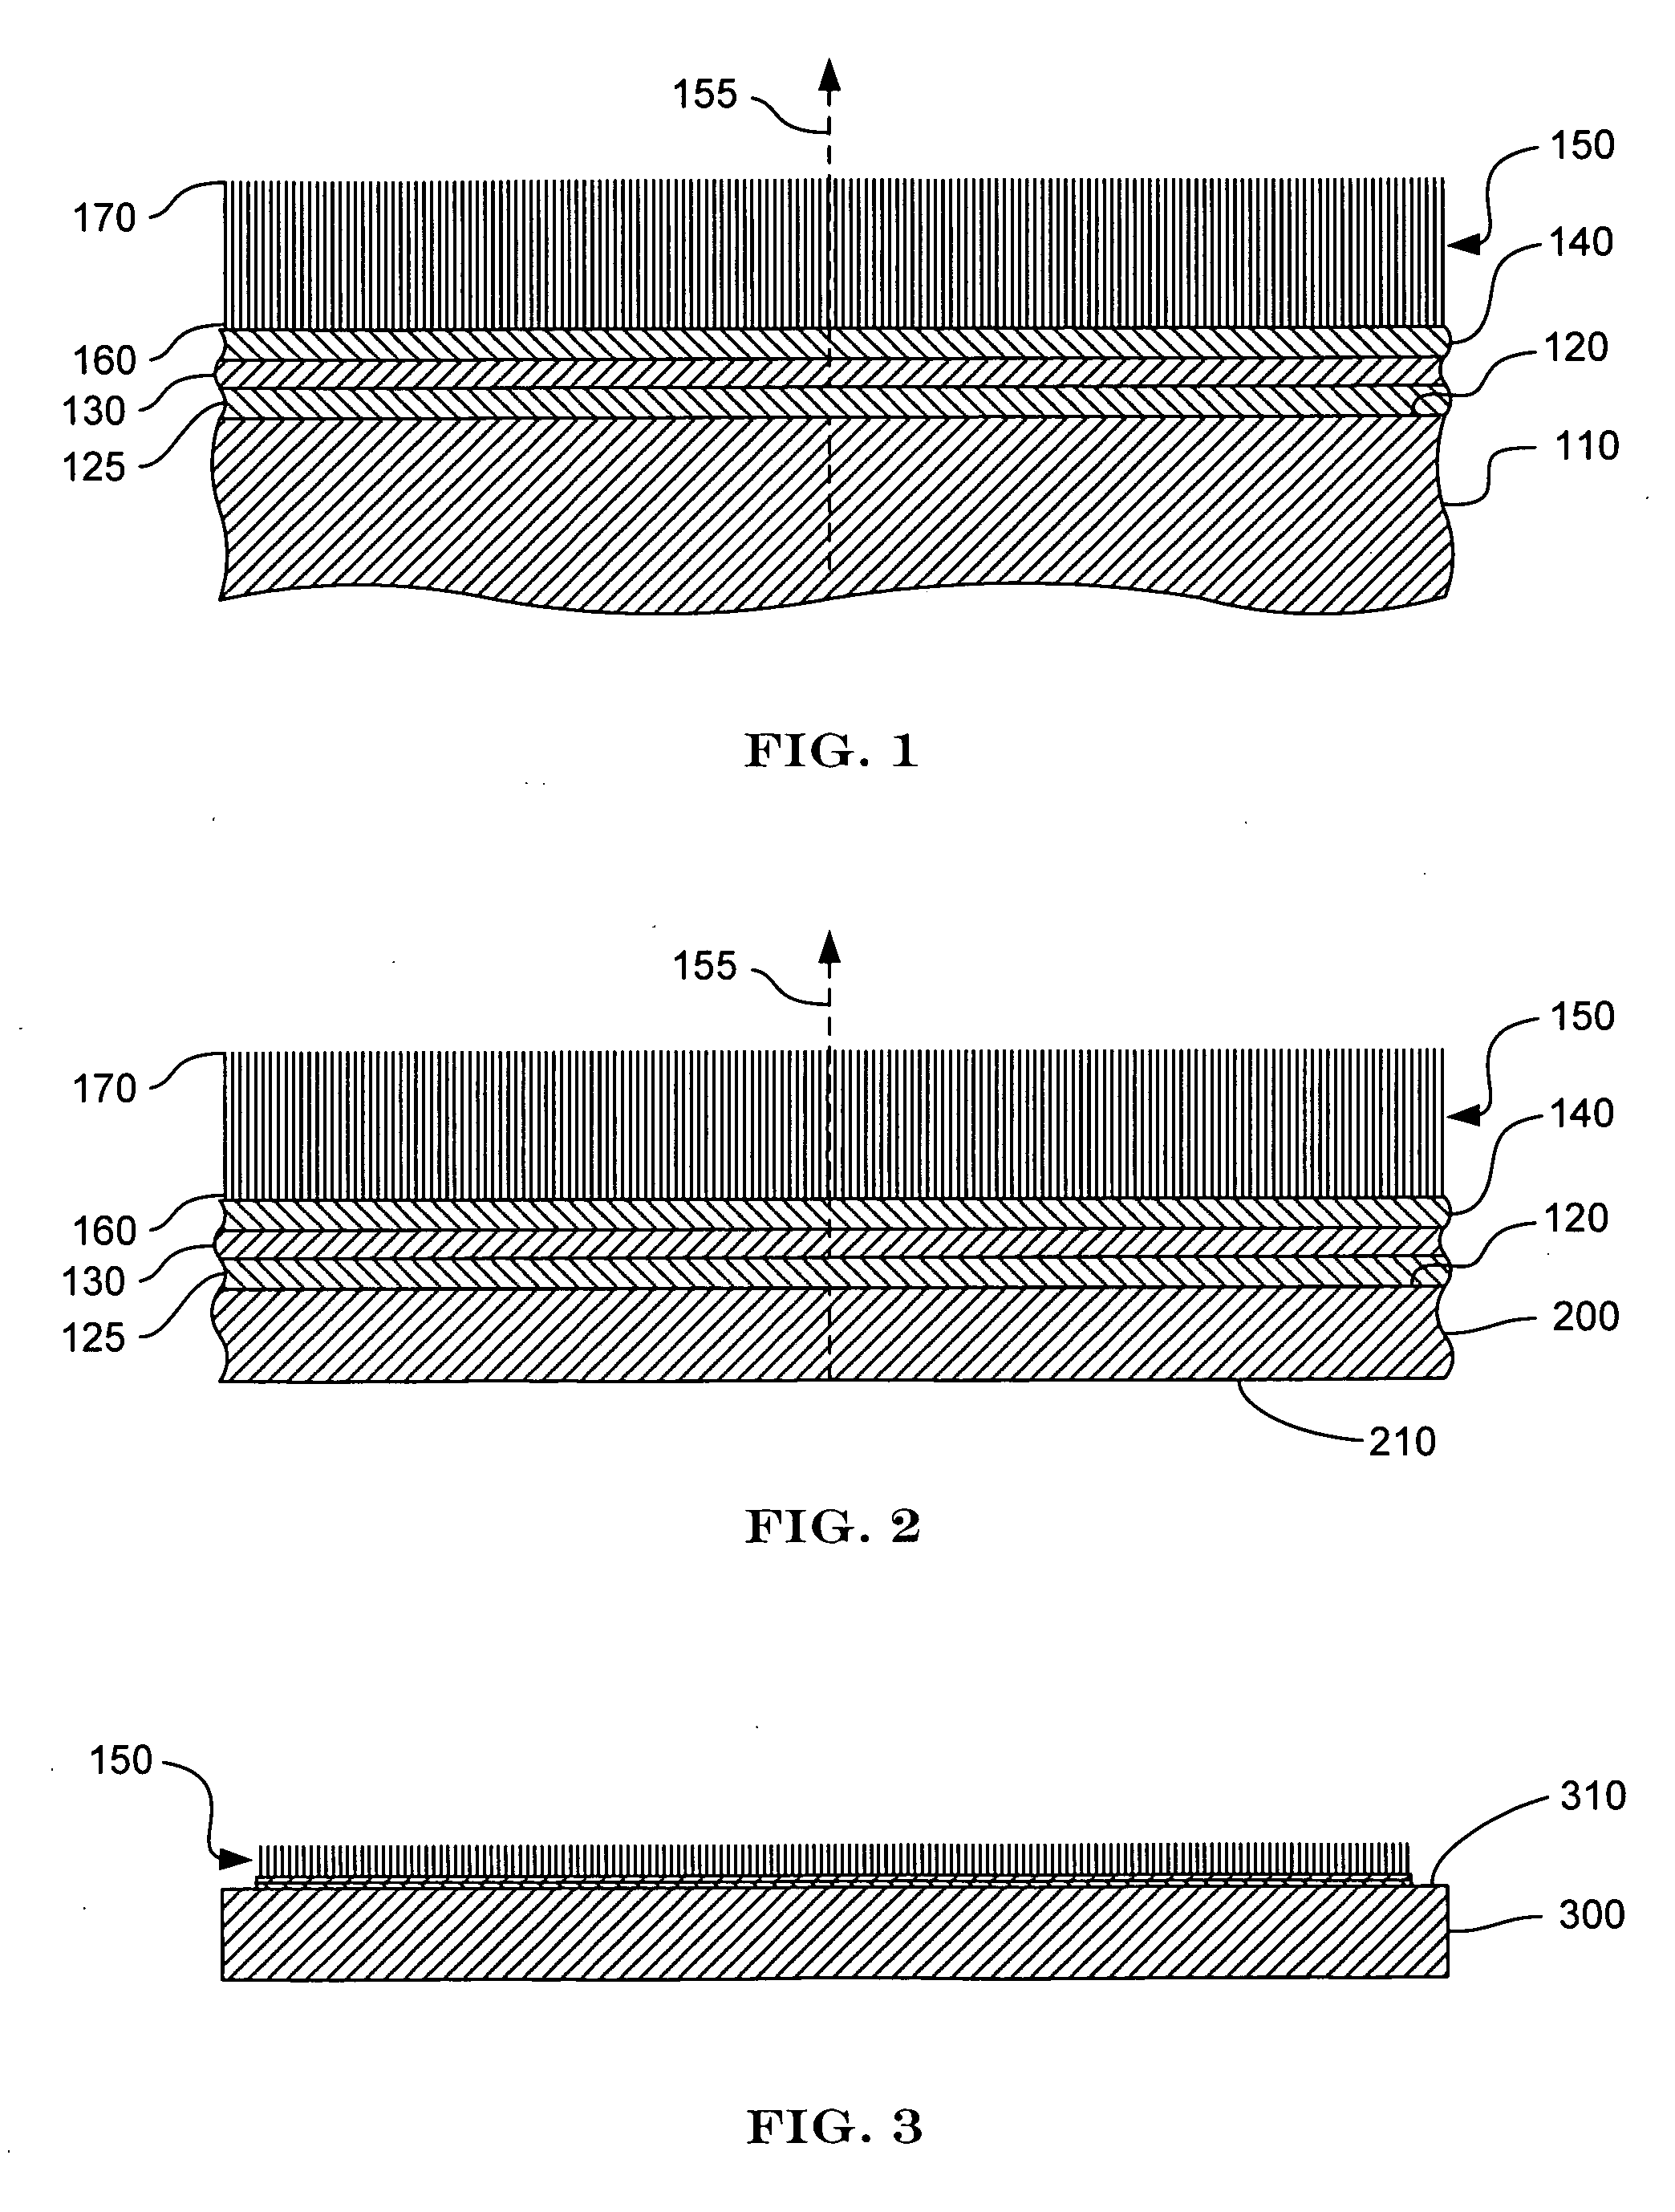 Devices incorporating carbon nanotube thermal pads